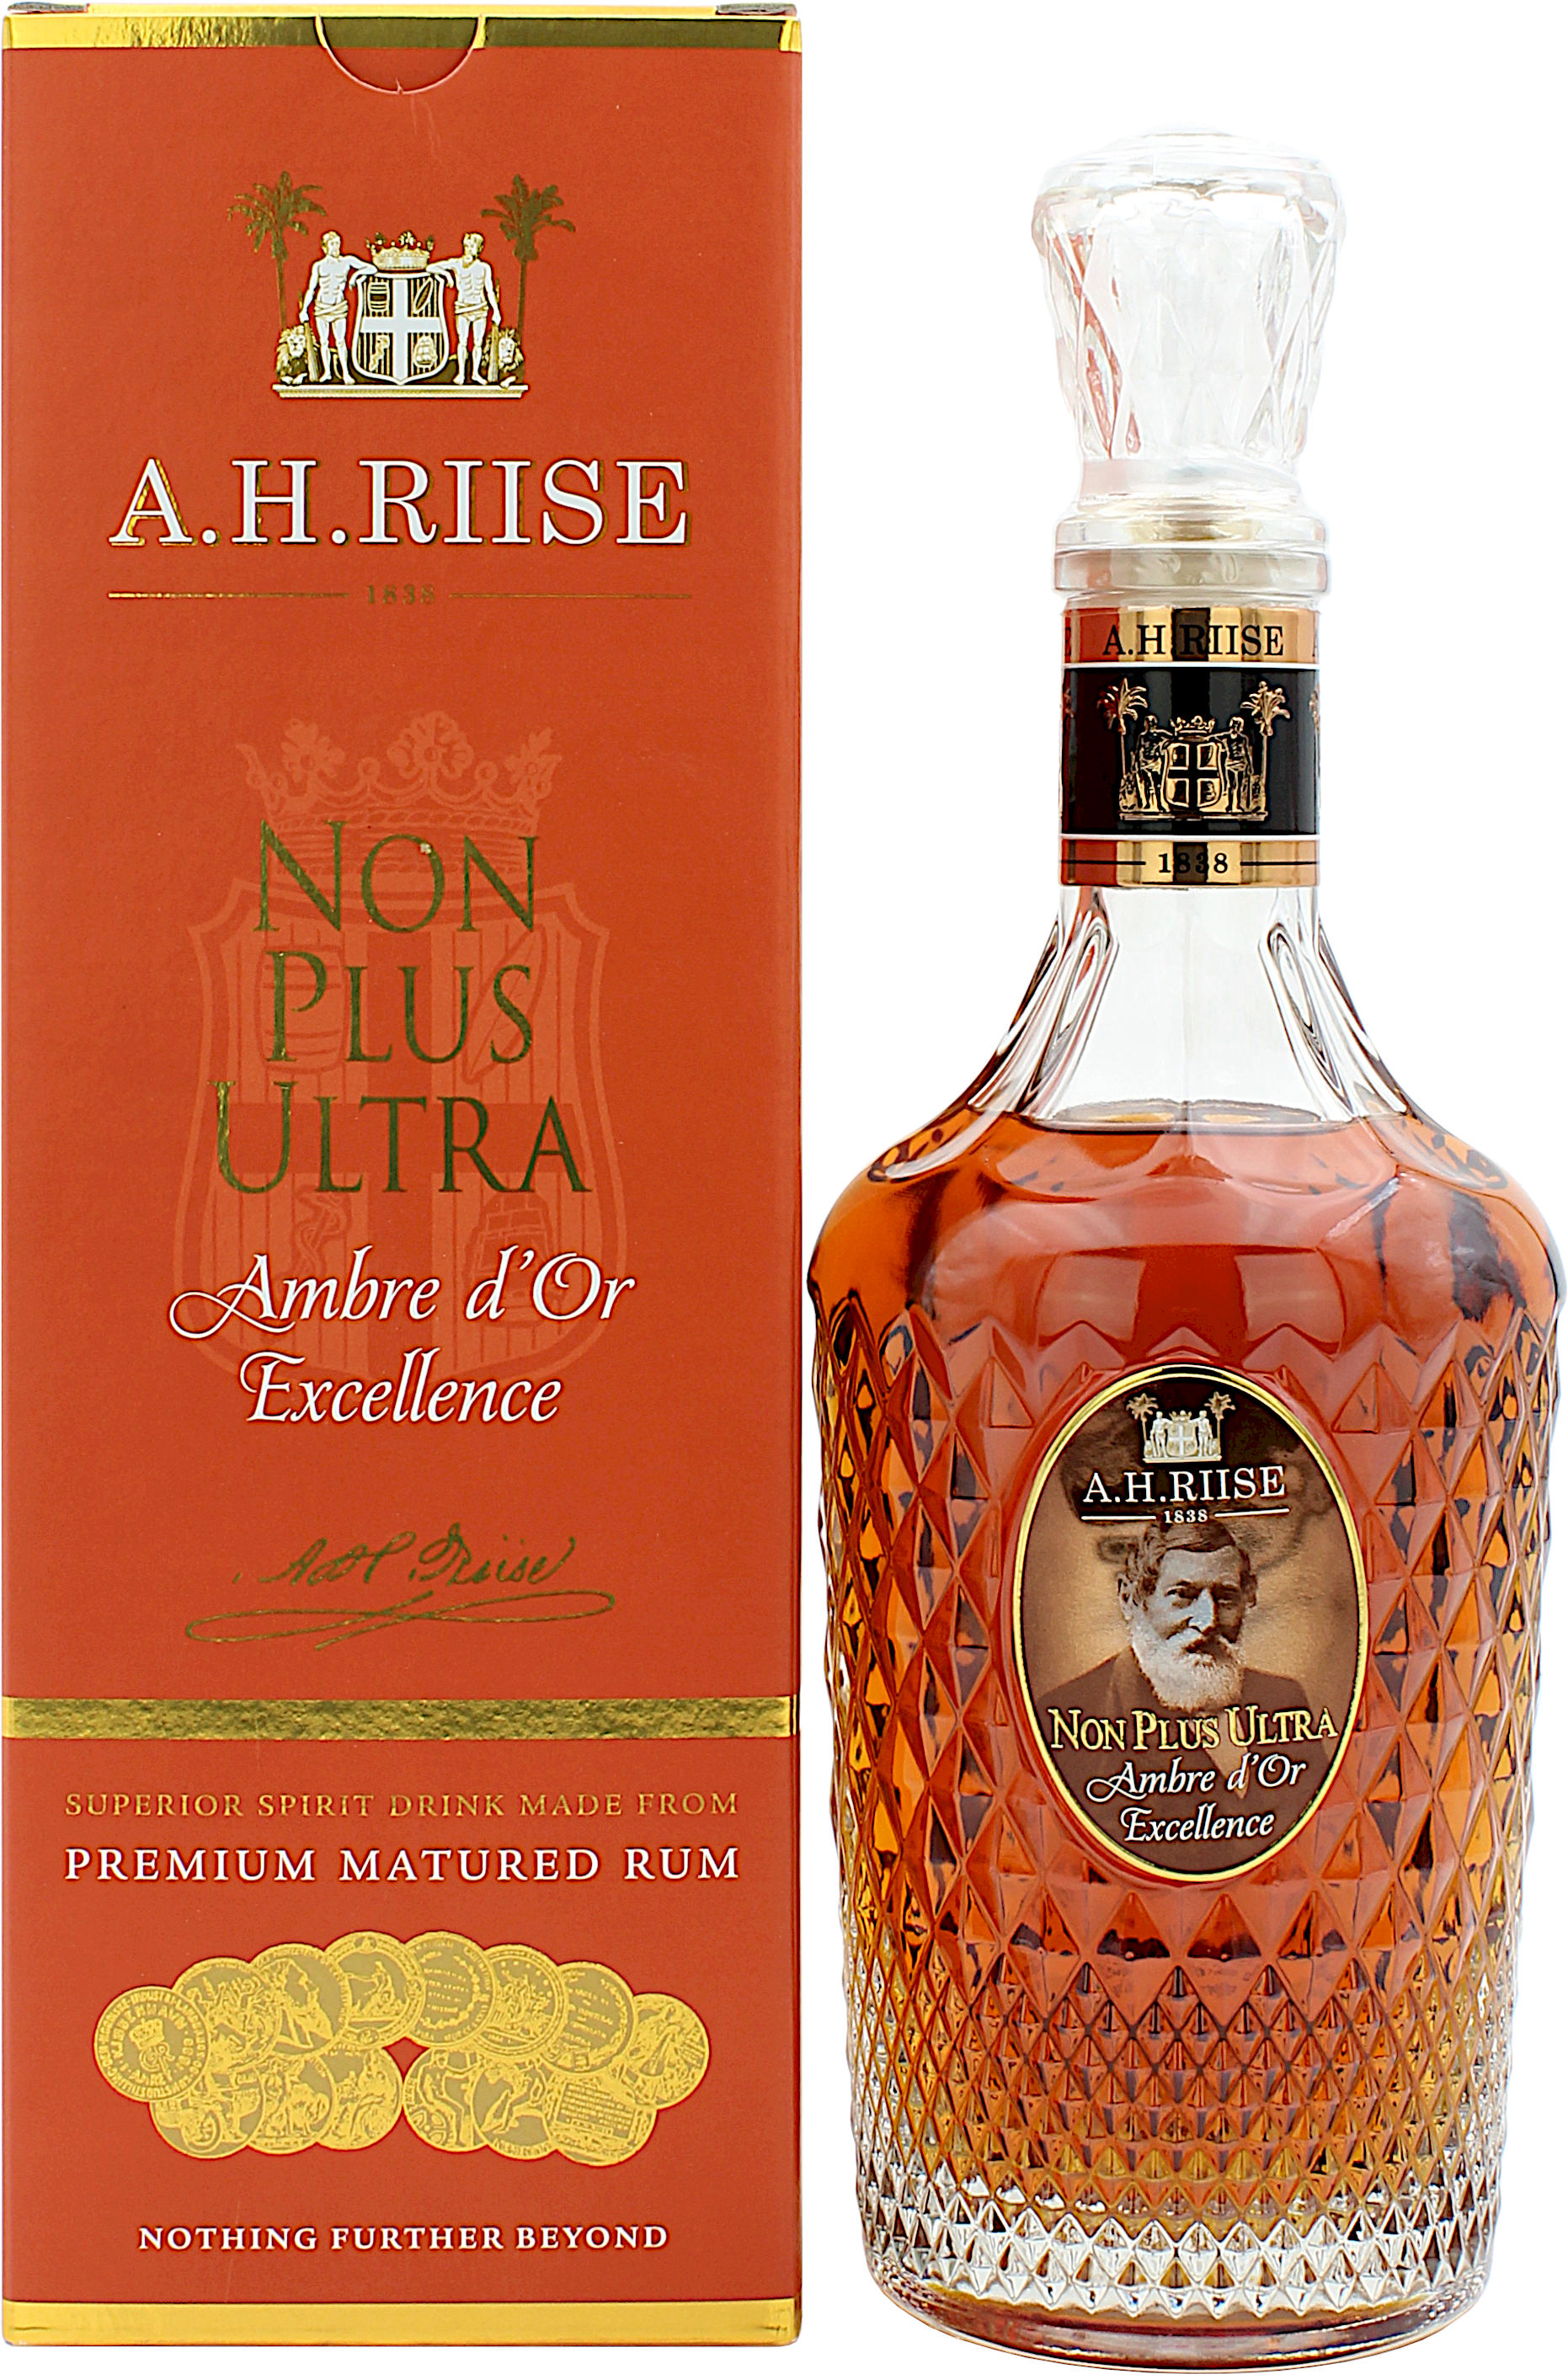 A.H. Riise Non Plus Ultra Ambre d'Or Excellence 42.0% 0,7l